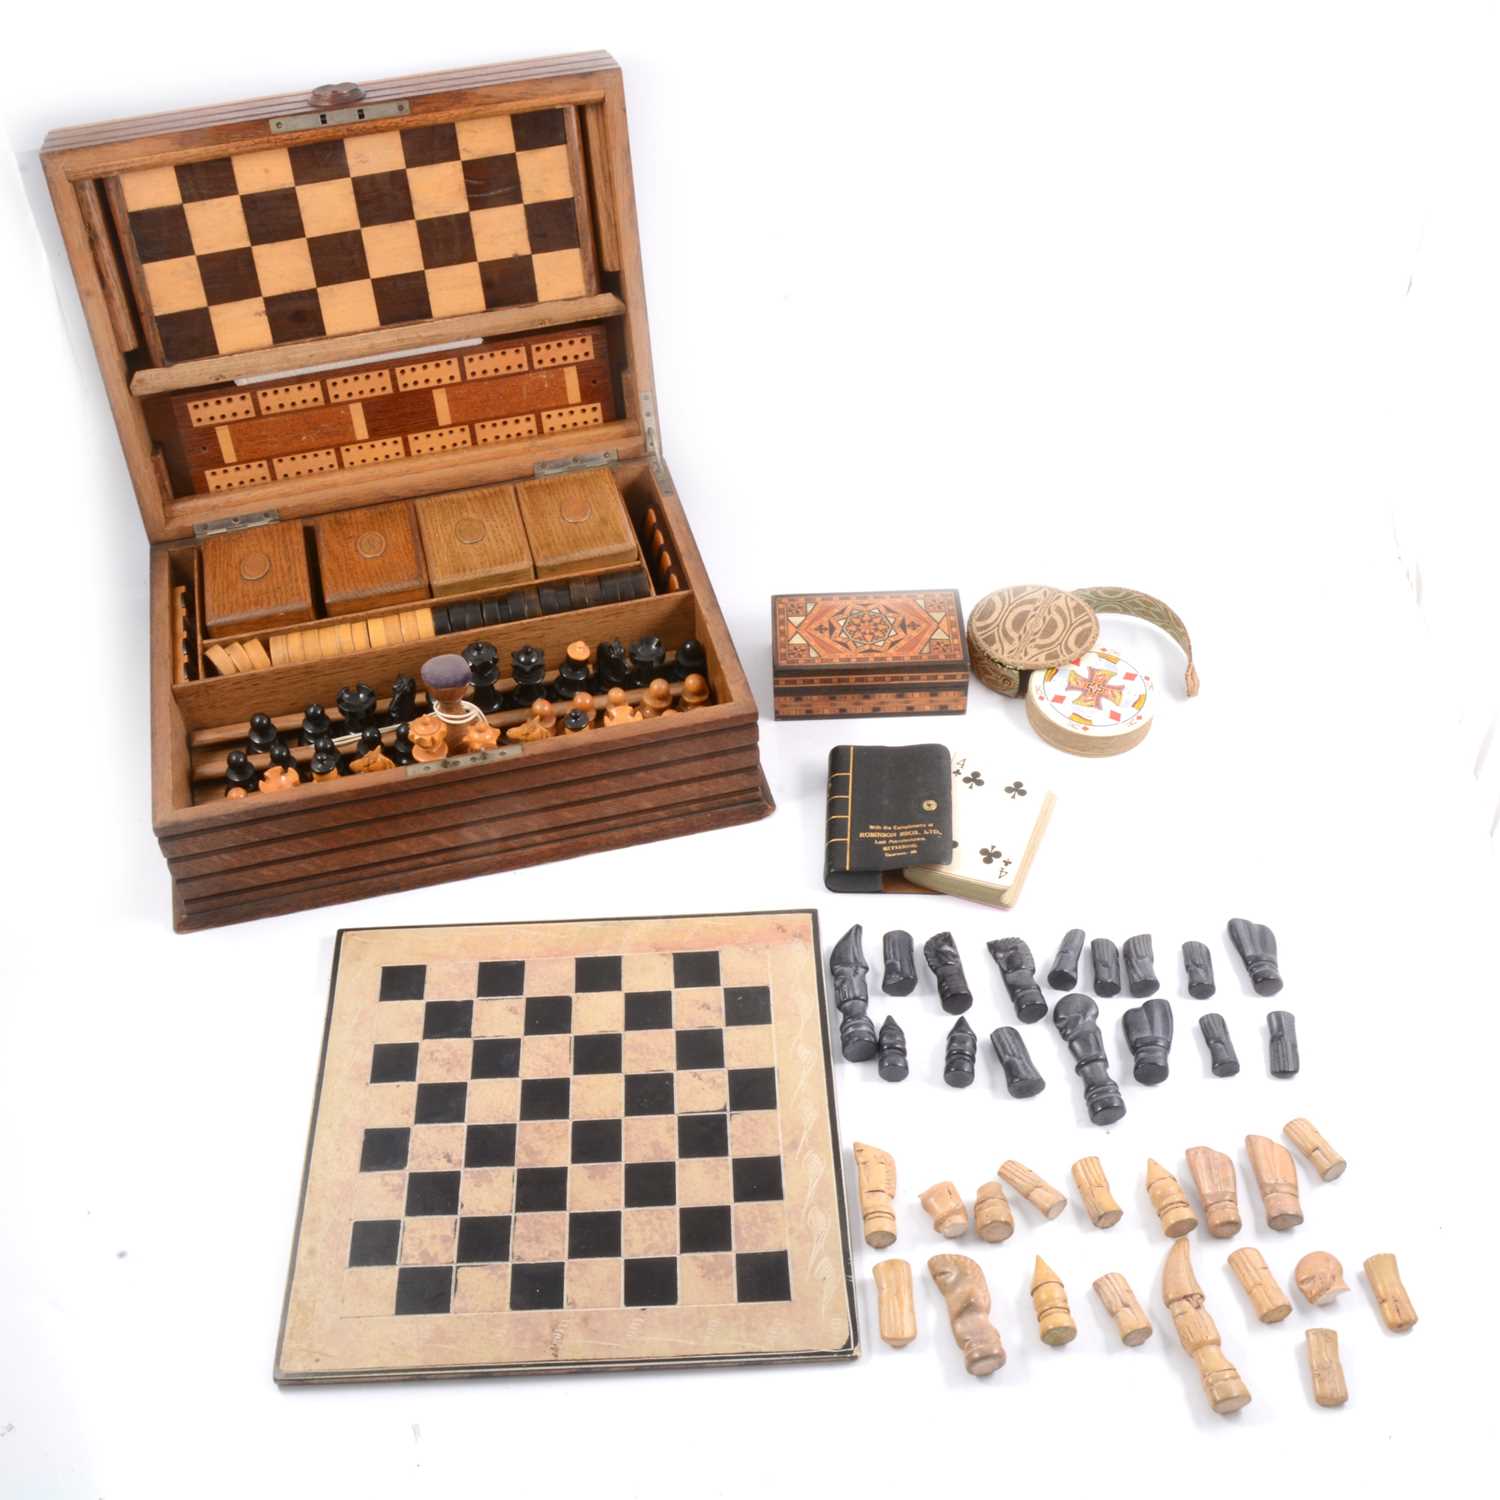 Lot 138 - Victorian cartonpierre mounted leather chessboard by Leuchars, and other games.